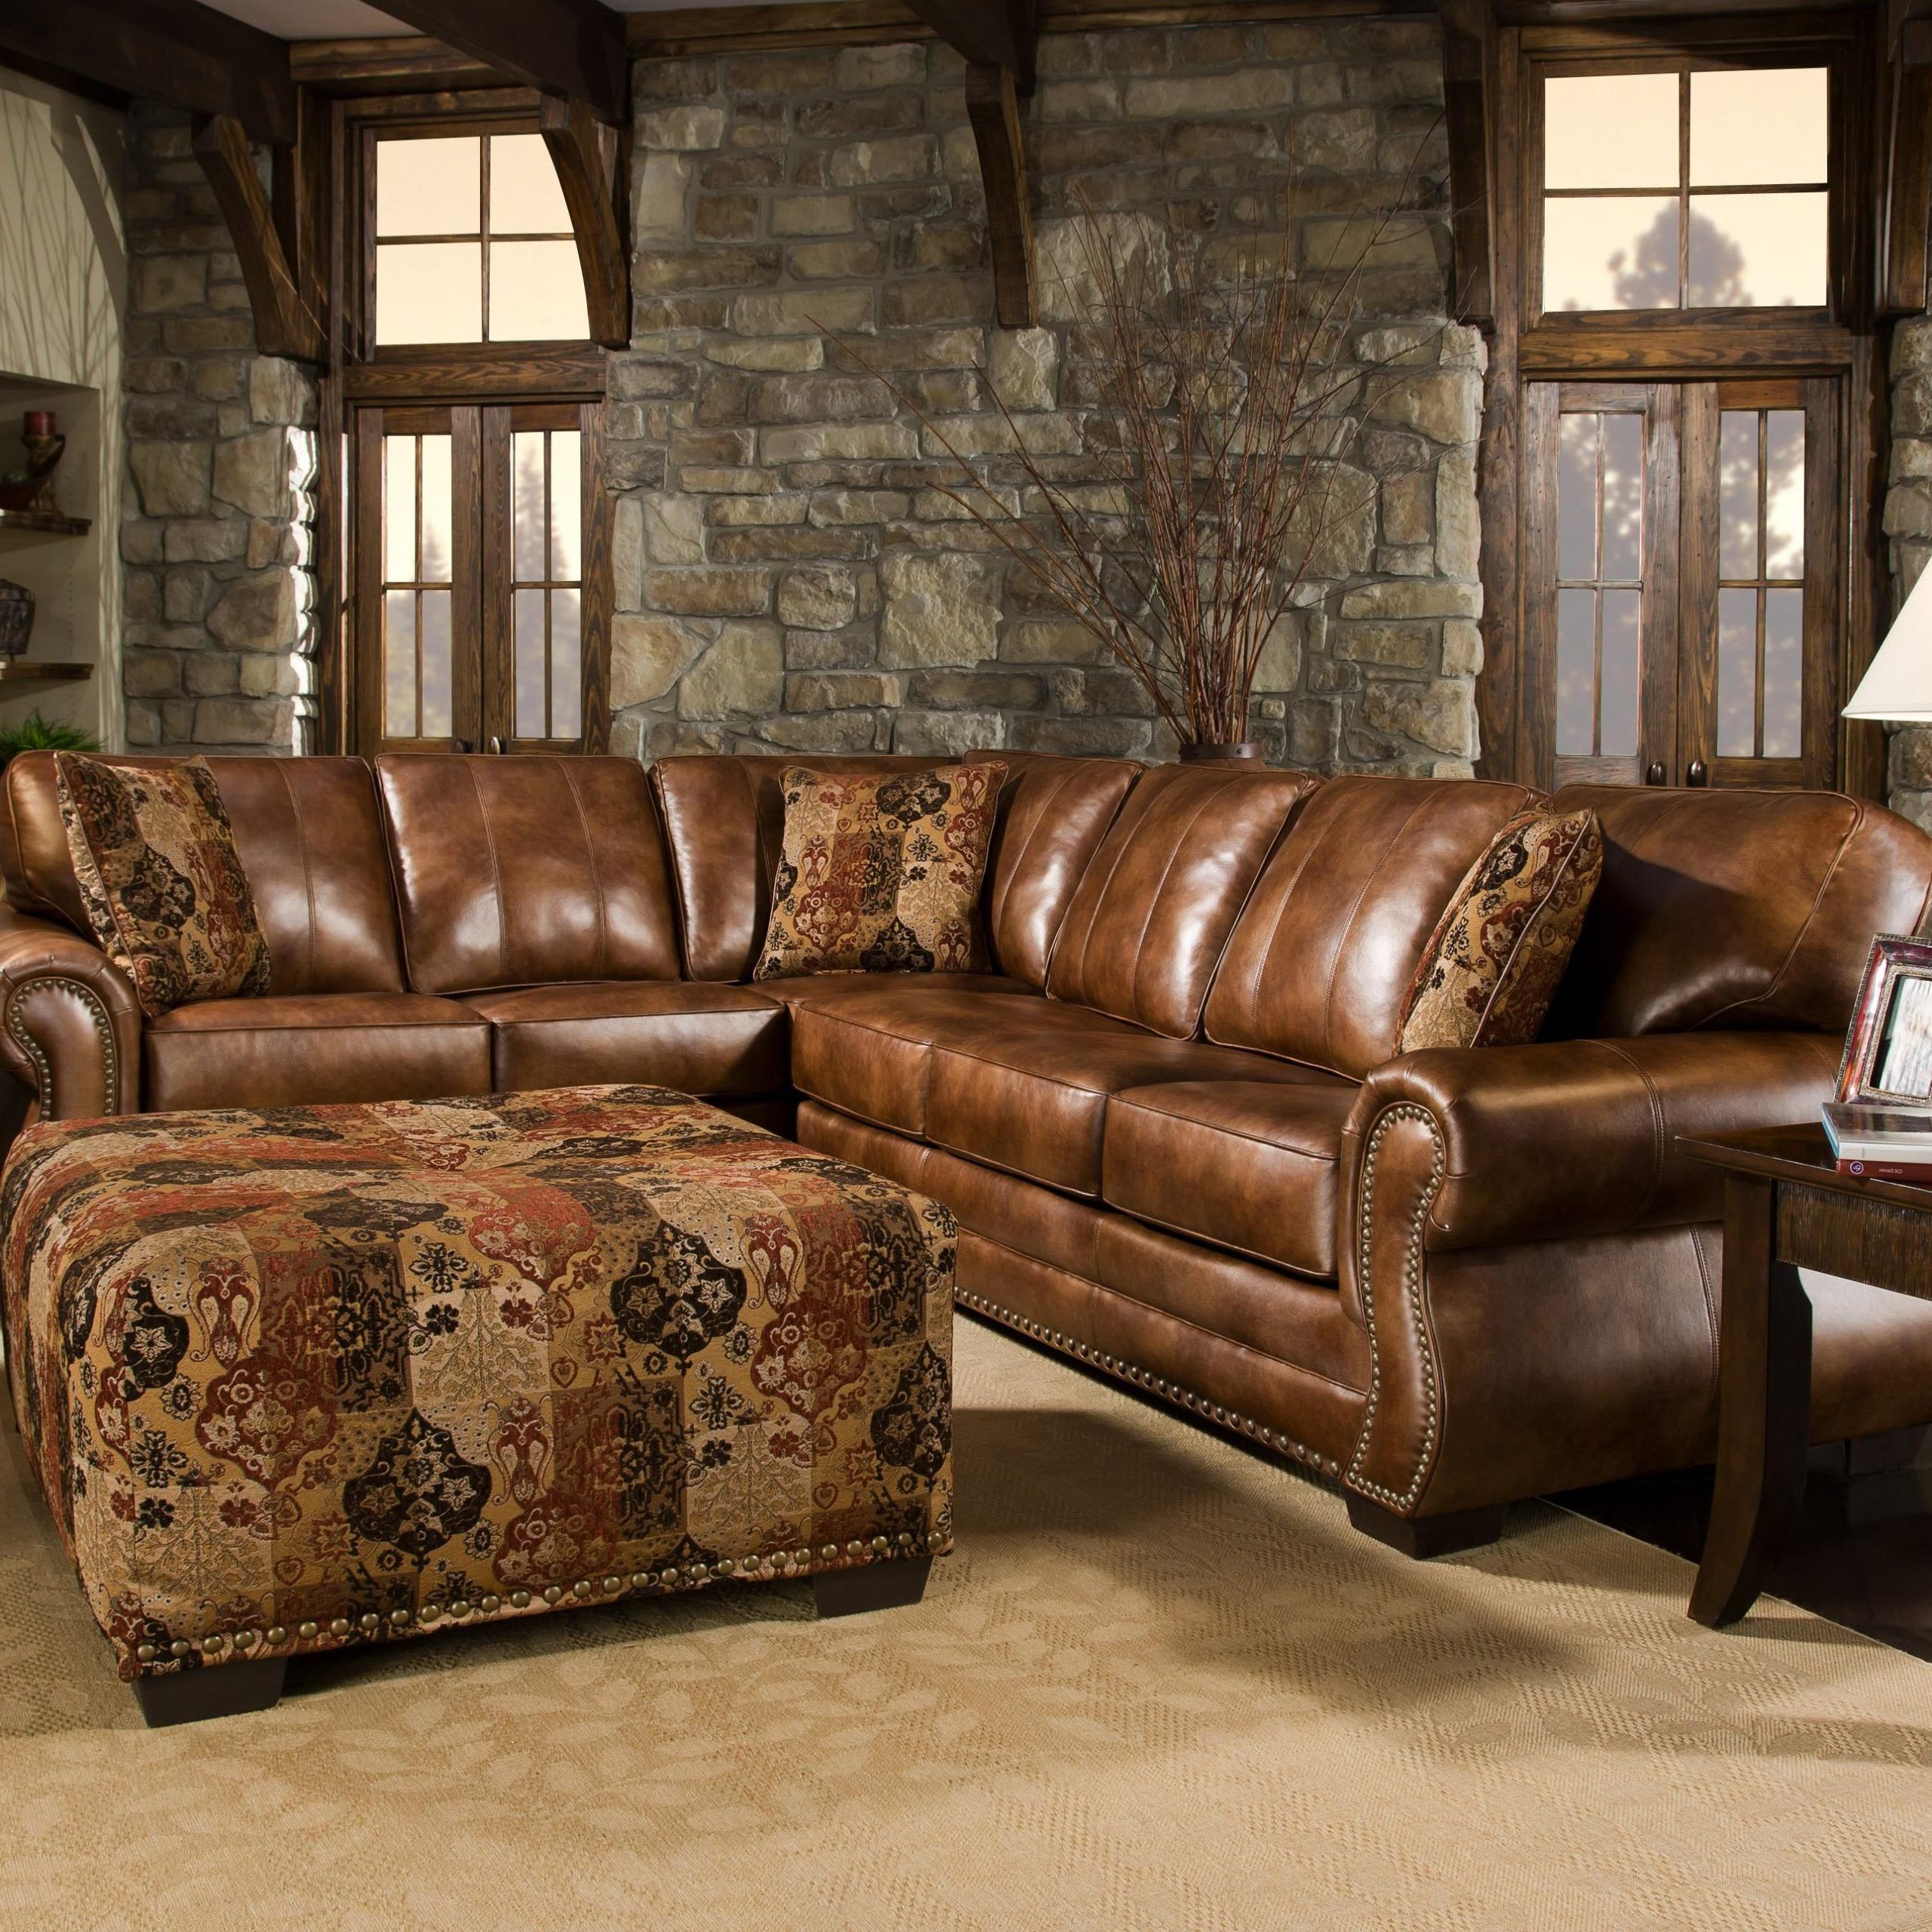 Widely Used 3 Piece Leather Sectional Sofa Sets With Regard To Sectional Sofacorinthian. Beautiful. For The Family Room Sectional (Photo 14 of 15)